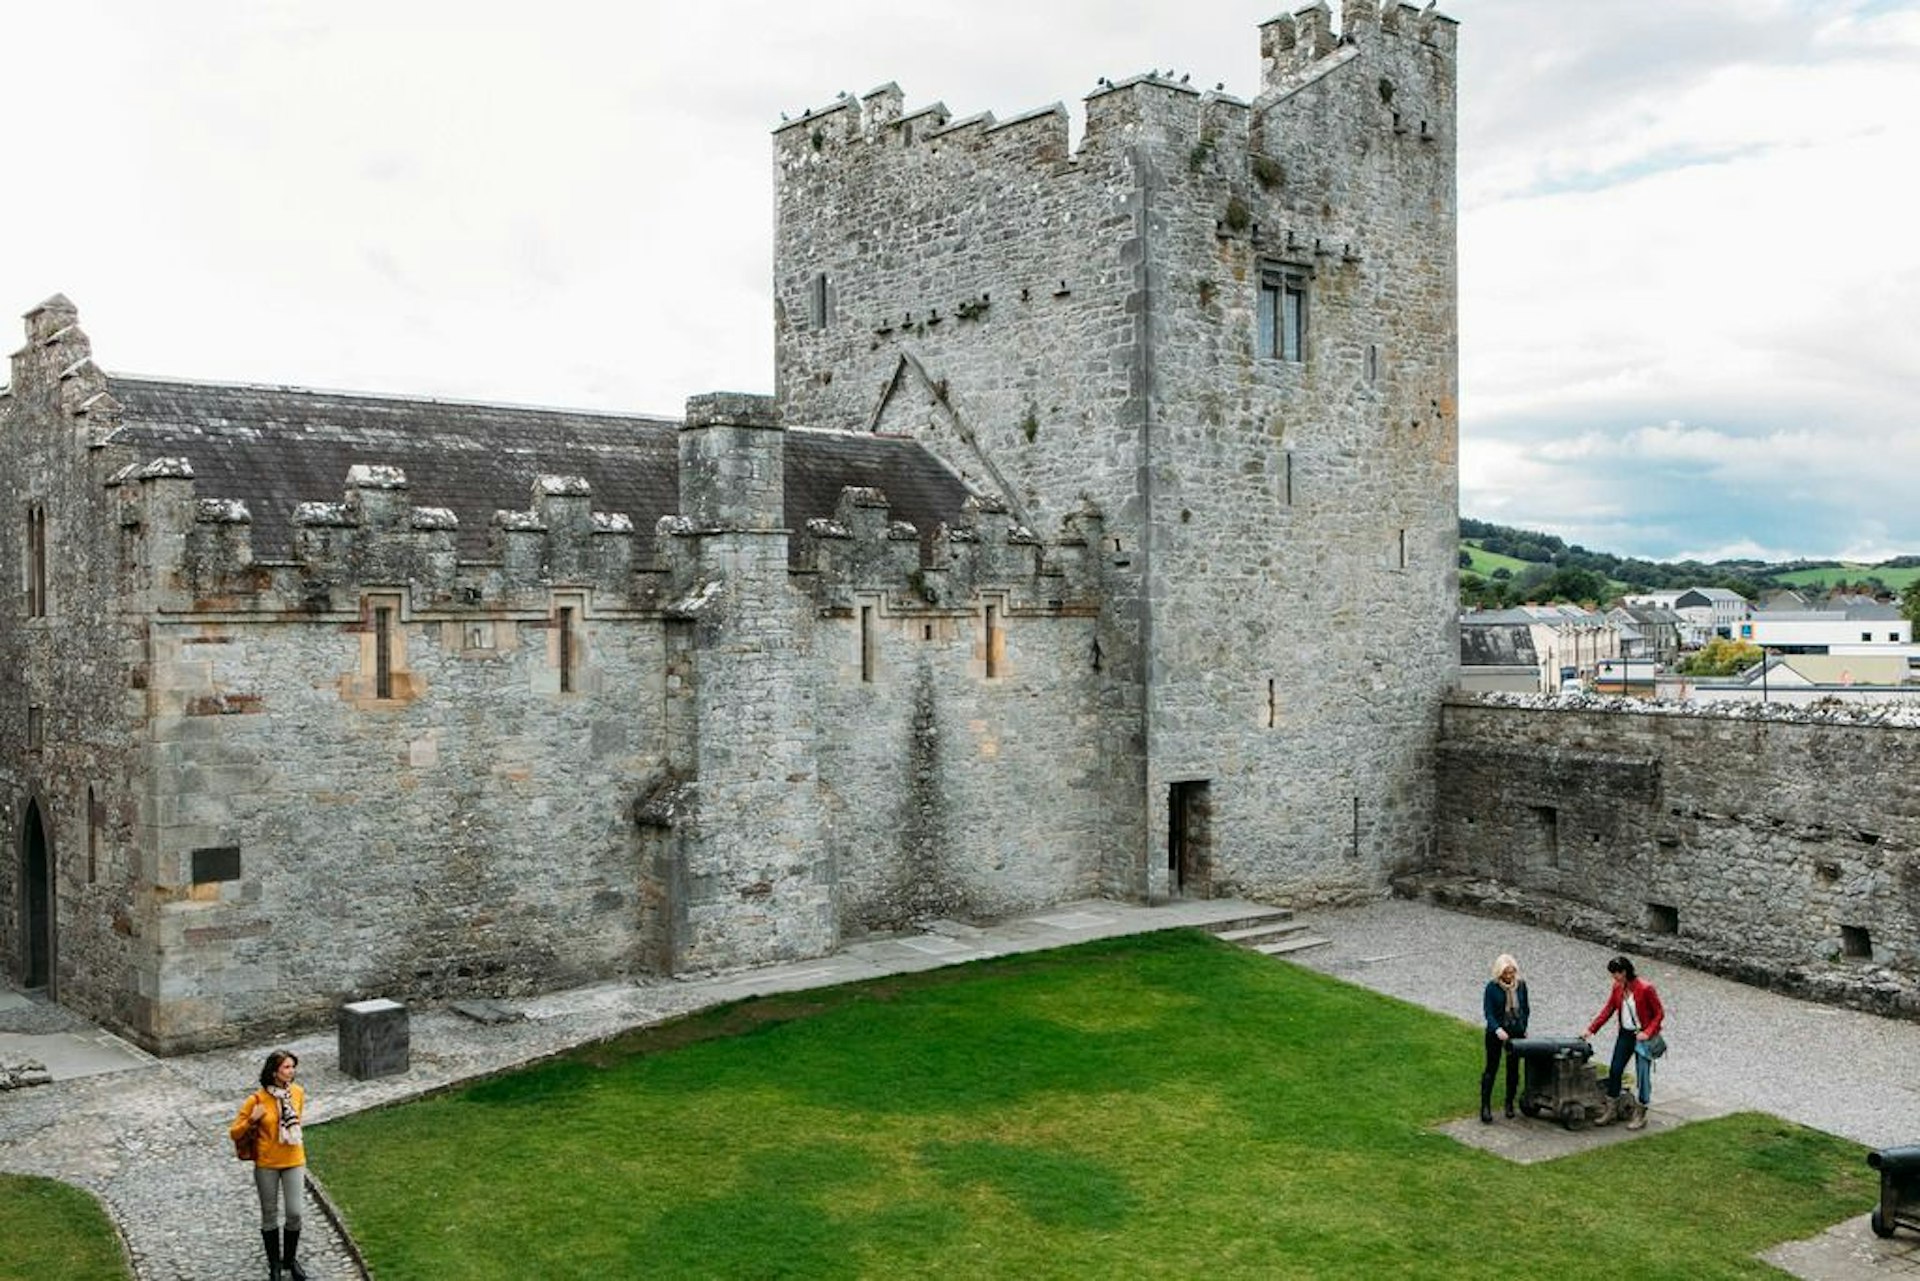 The interior of Cahir Castle in Tipperary